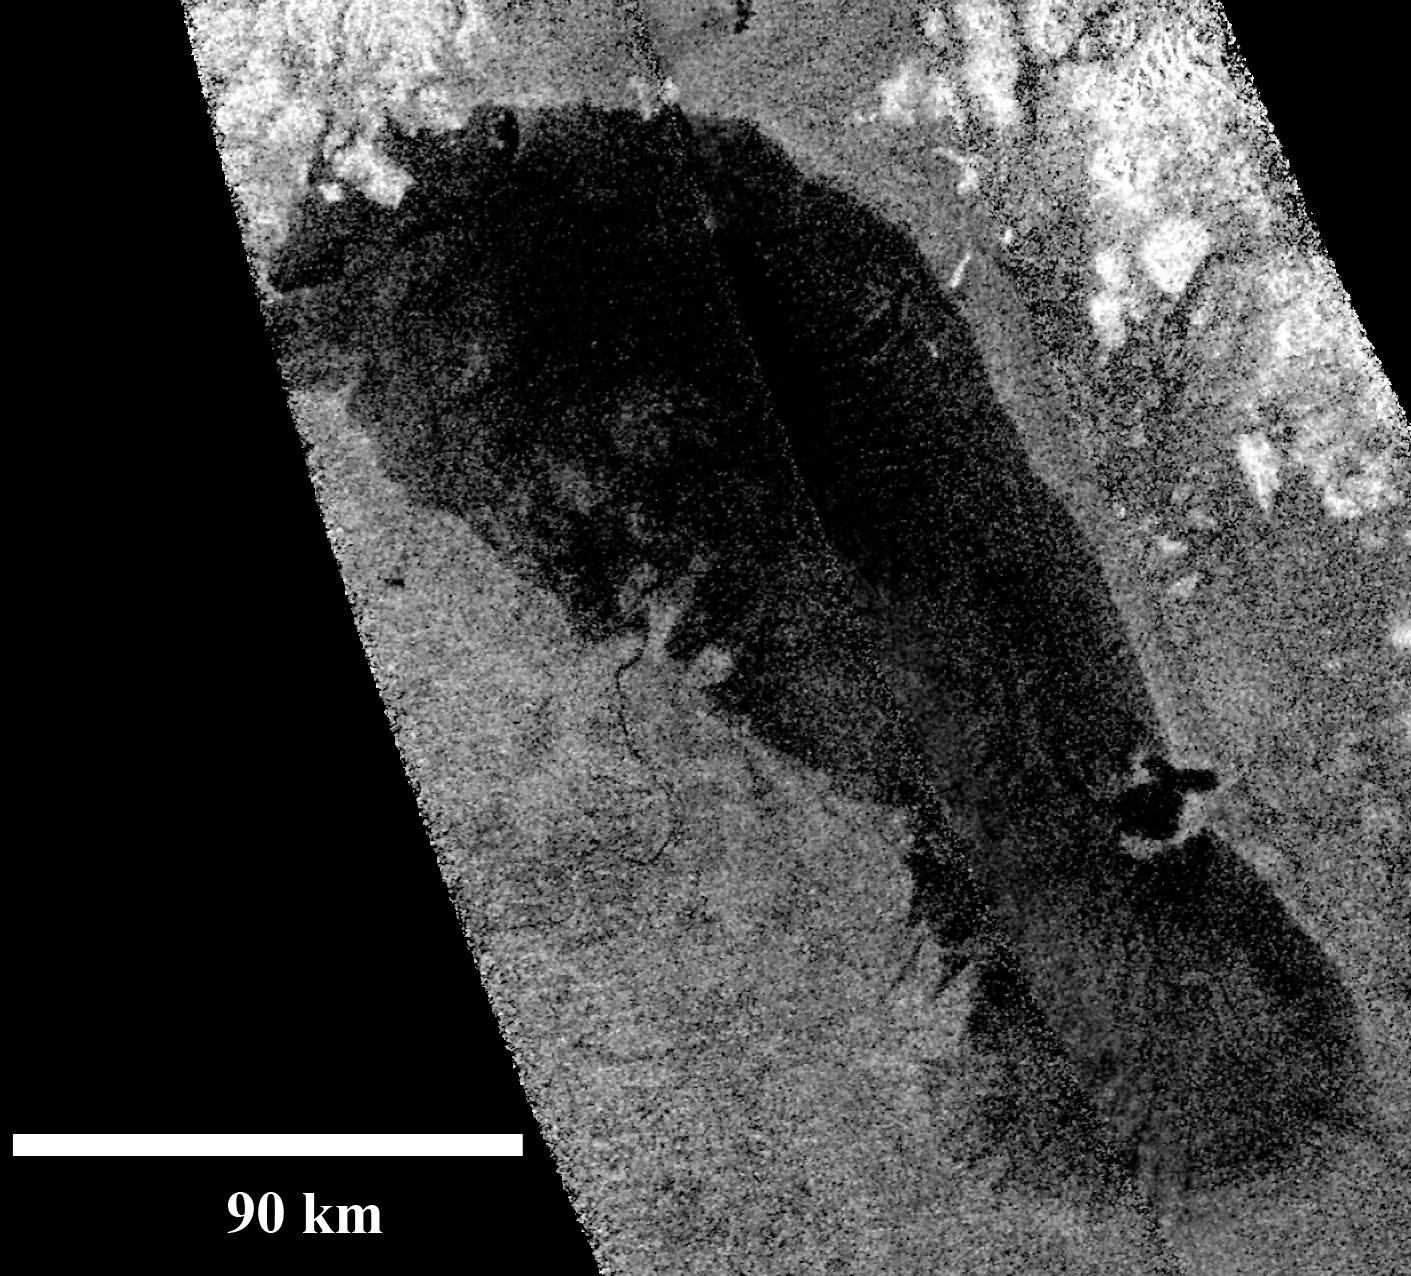 Ontario Lacus, the largest lake on the southern hemisphere of Saturn’s moon Titan